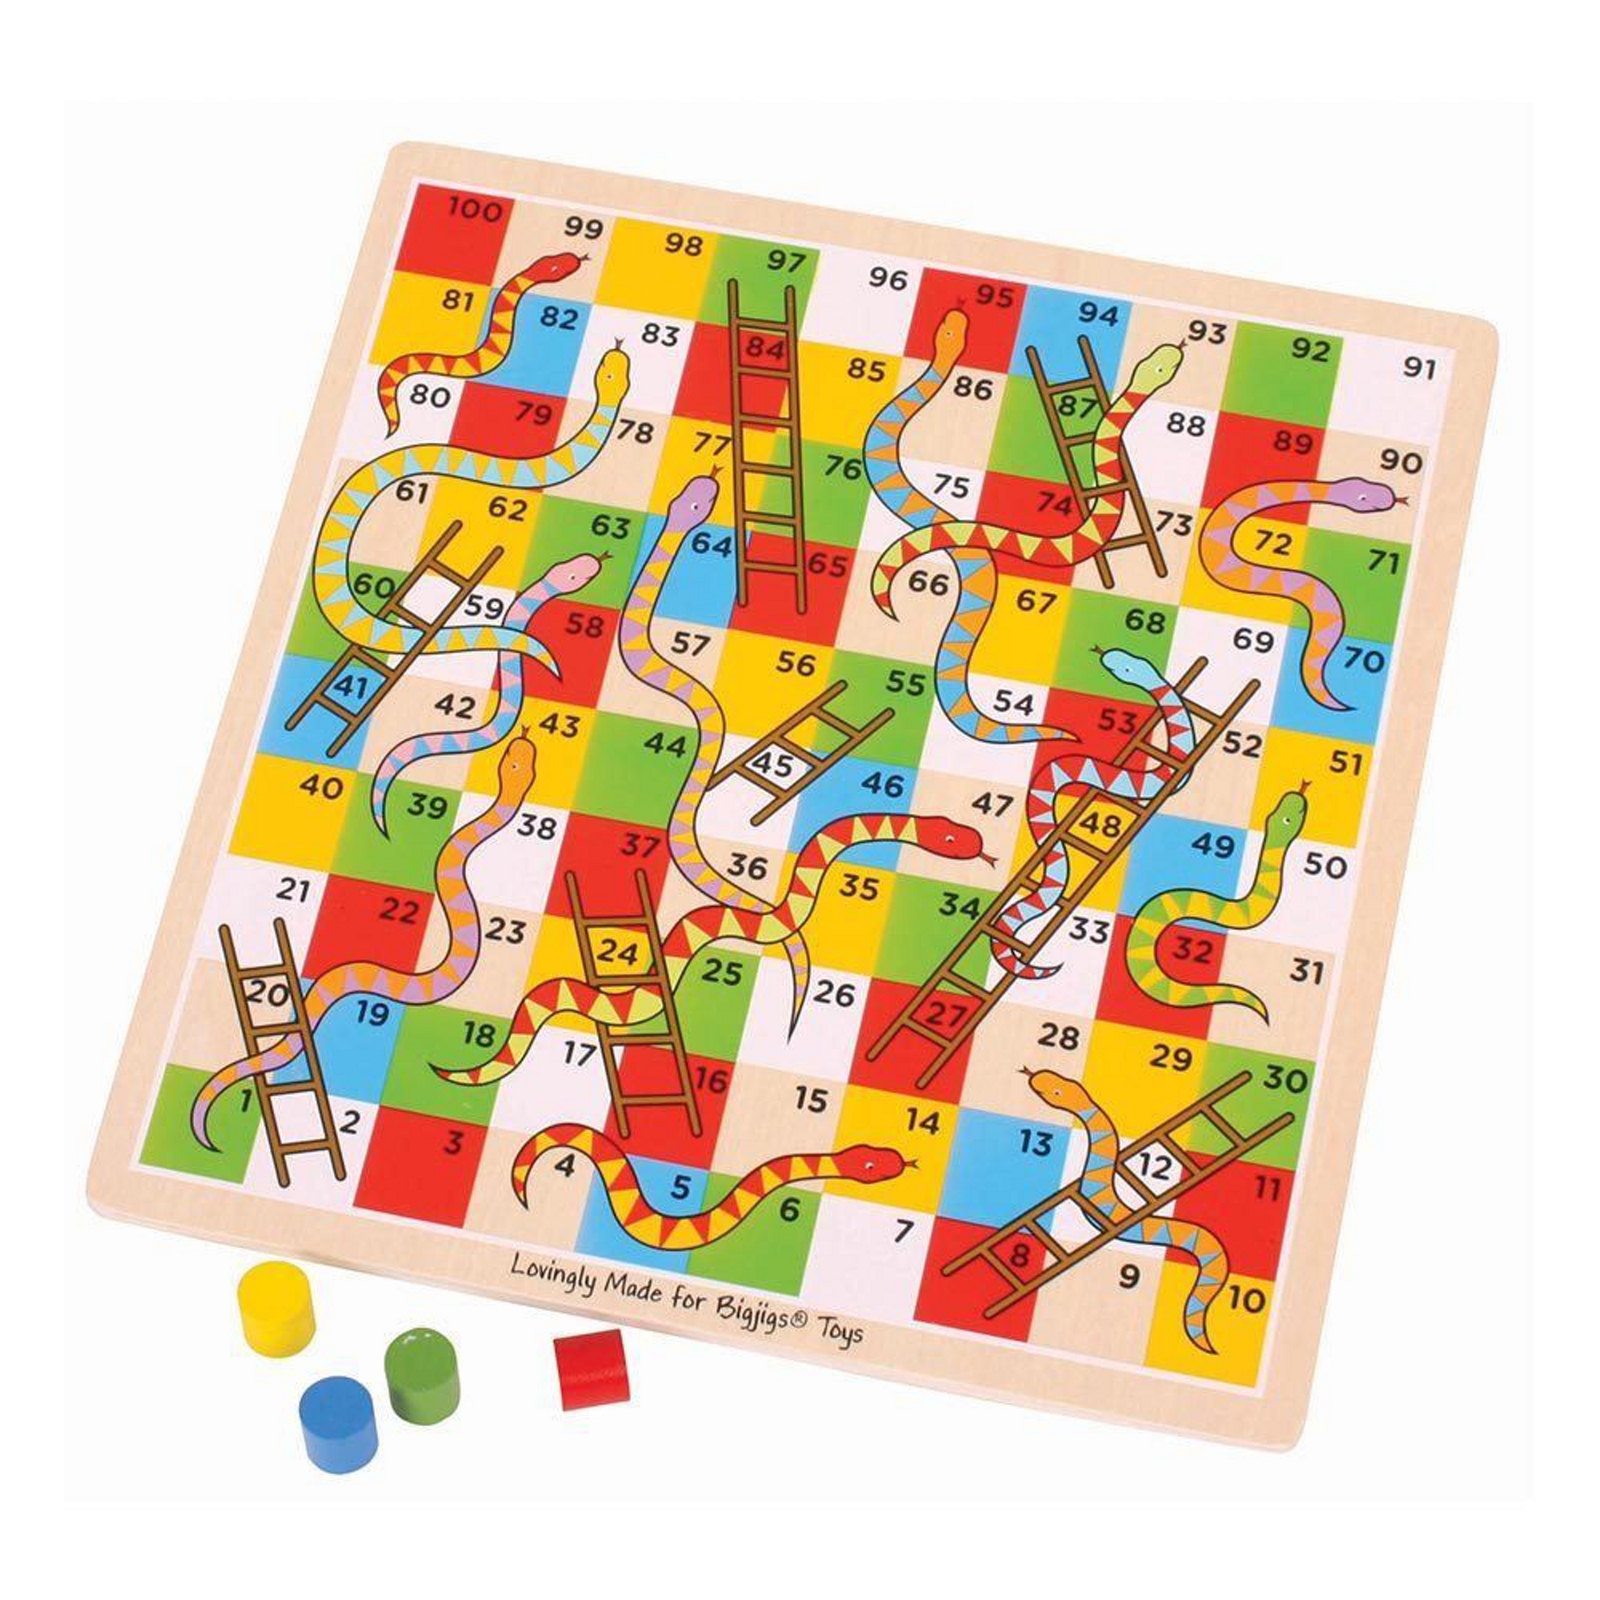 Snakes and Ladders - 280 x 280 x 10mm - Per Game